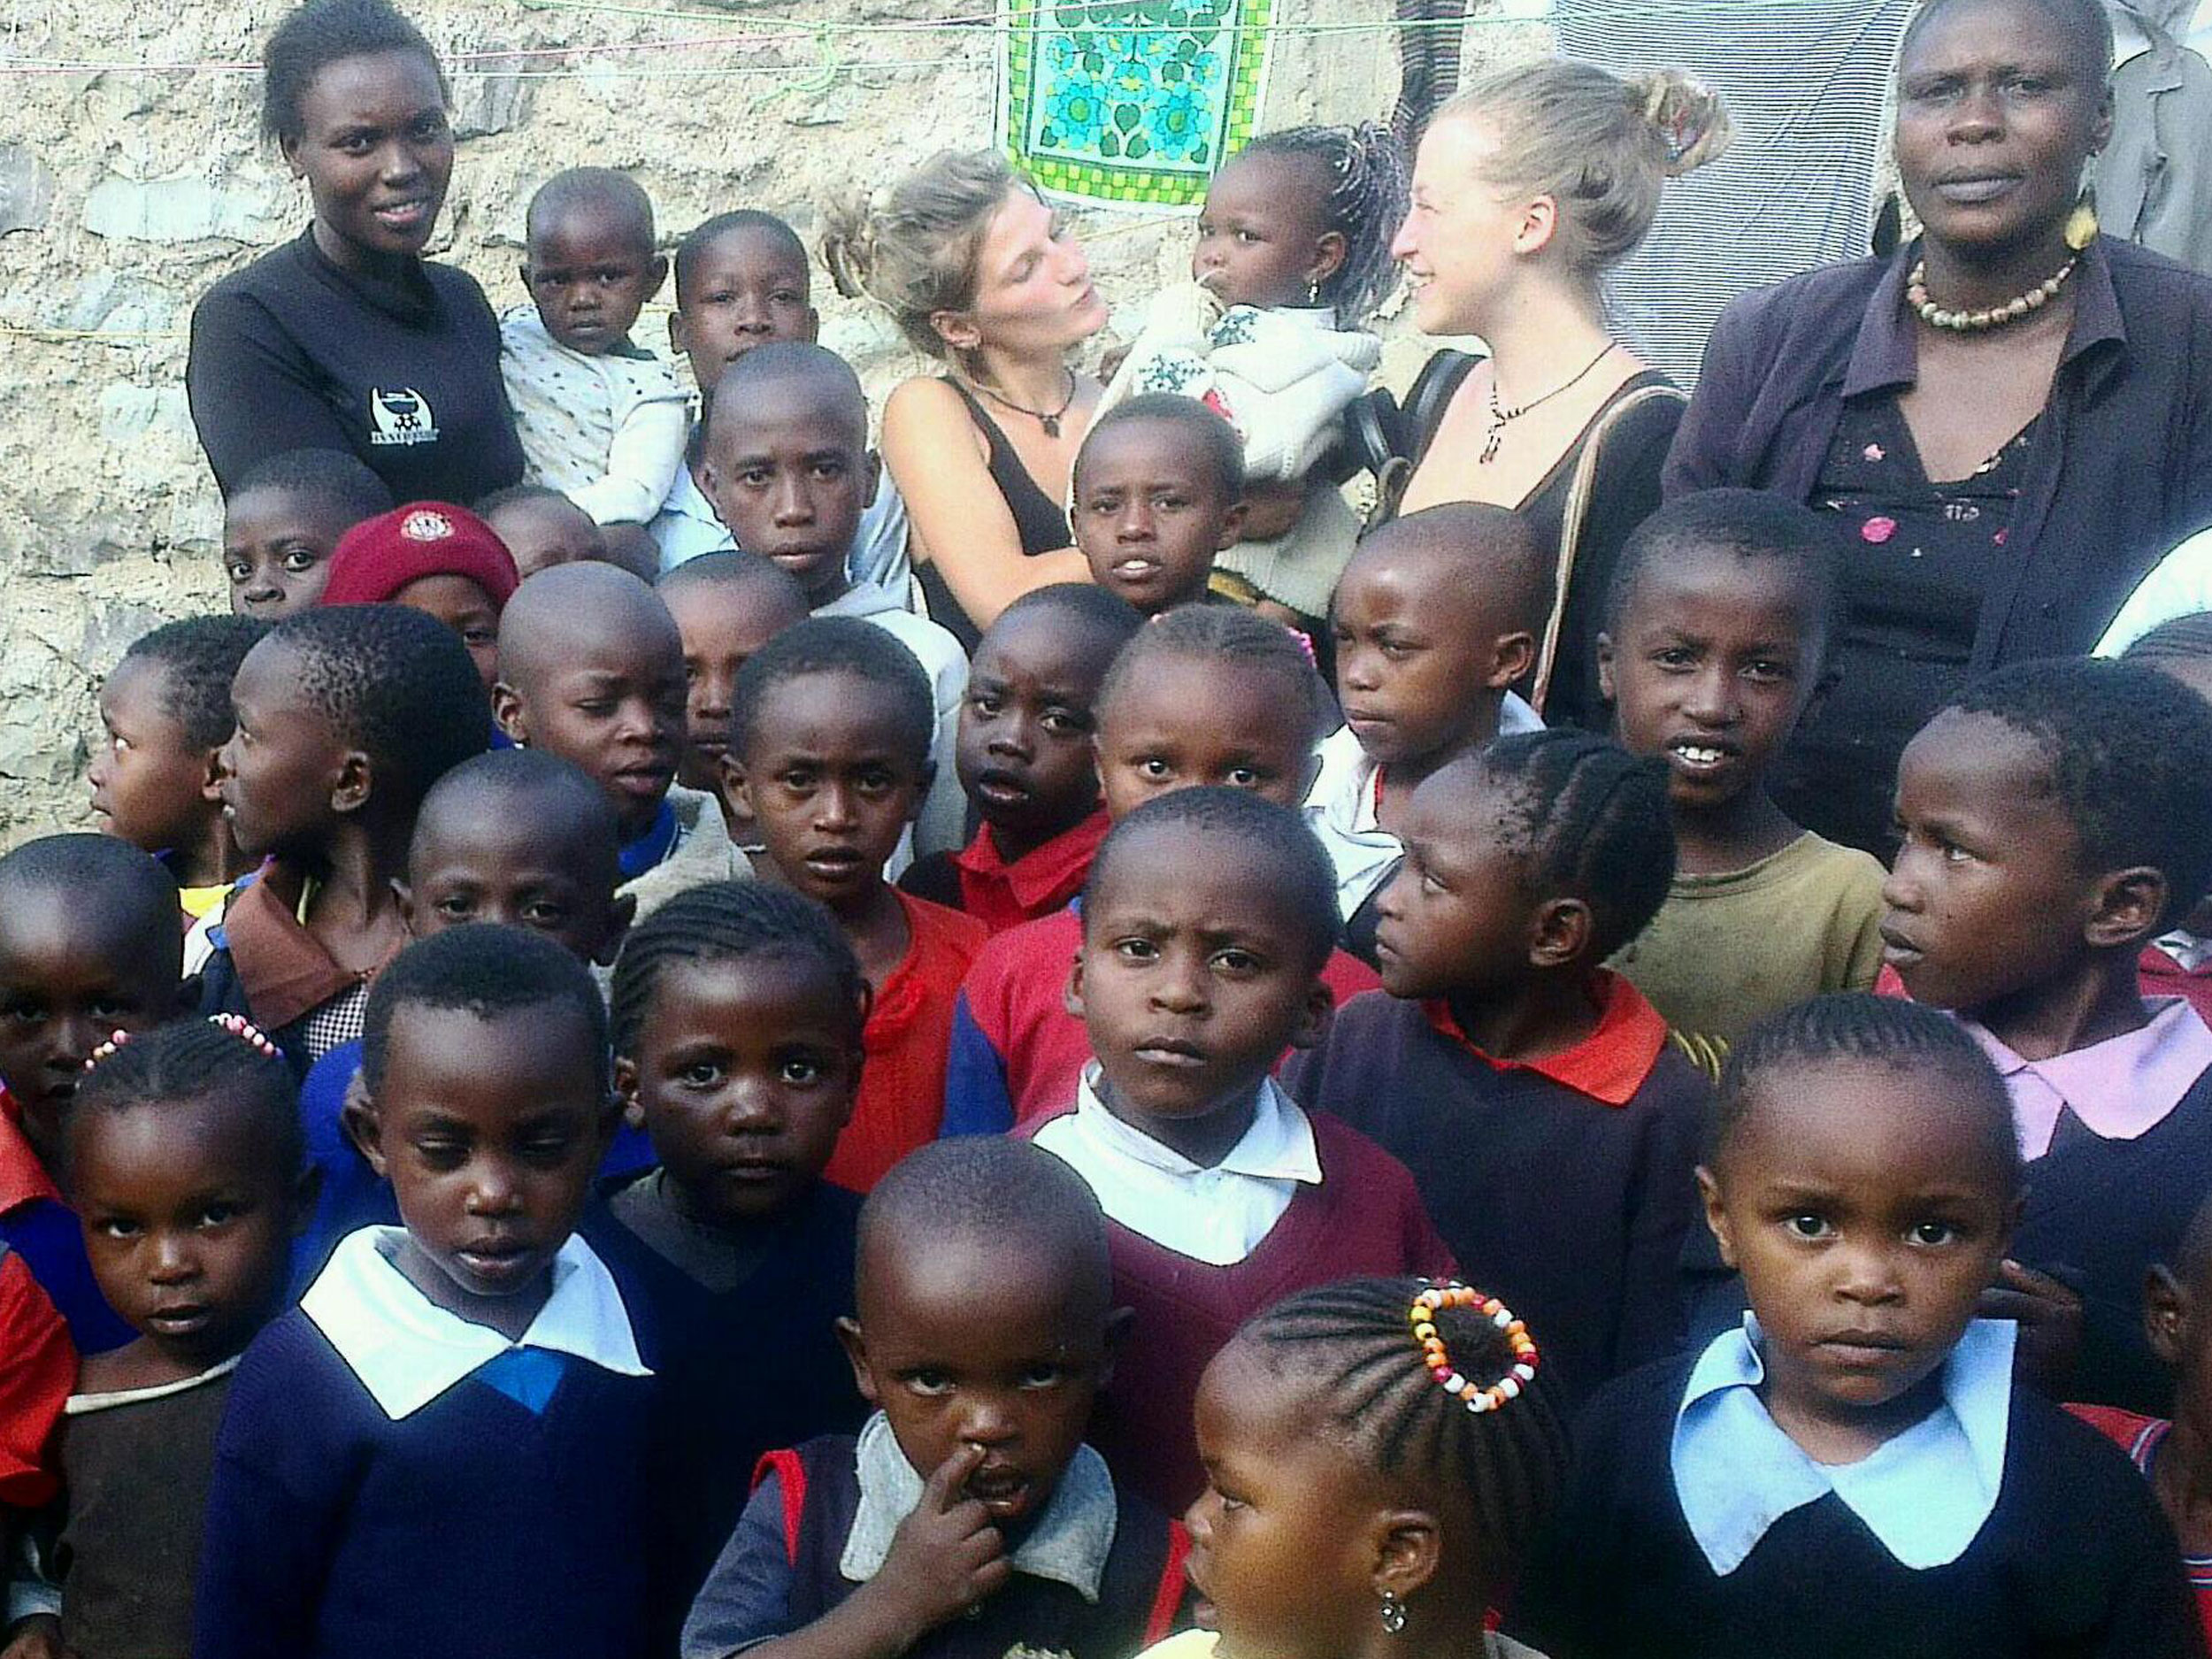 The first group picture with the students, headteacher Joyce (right) and the nursery teacher (left), 2013.